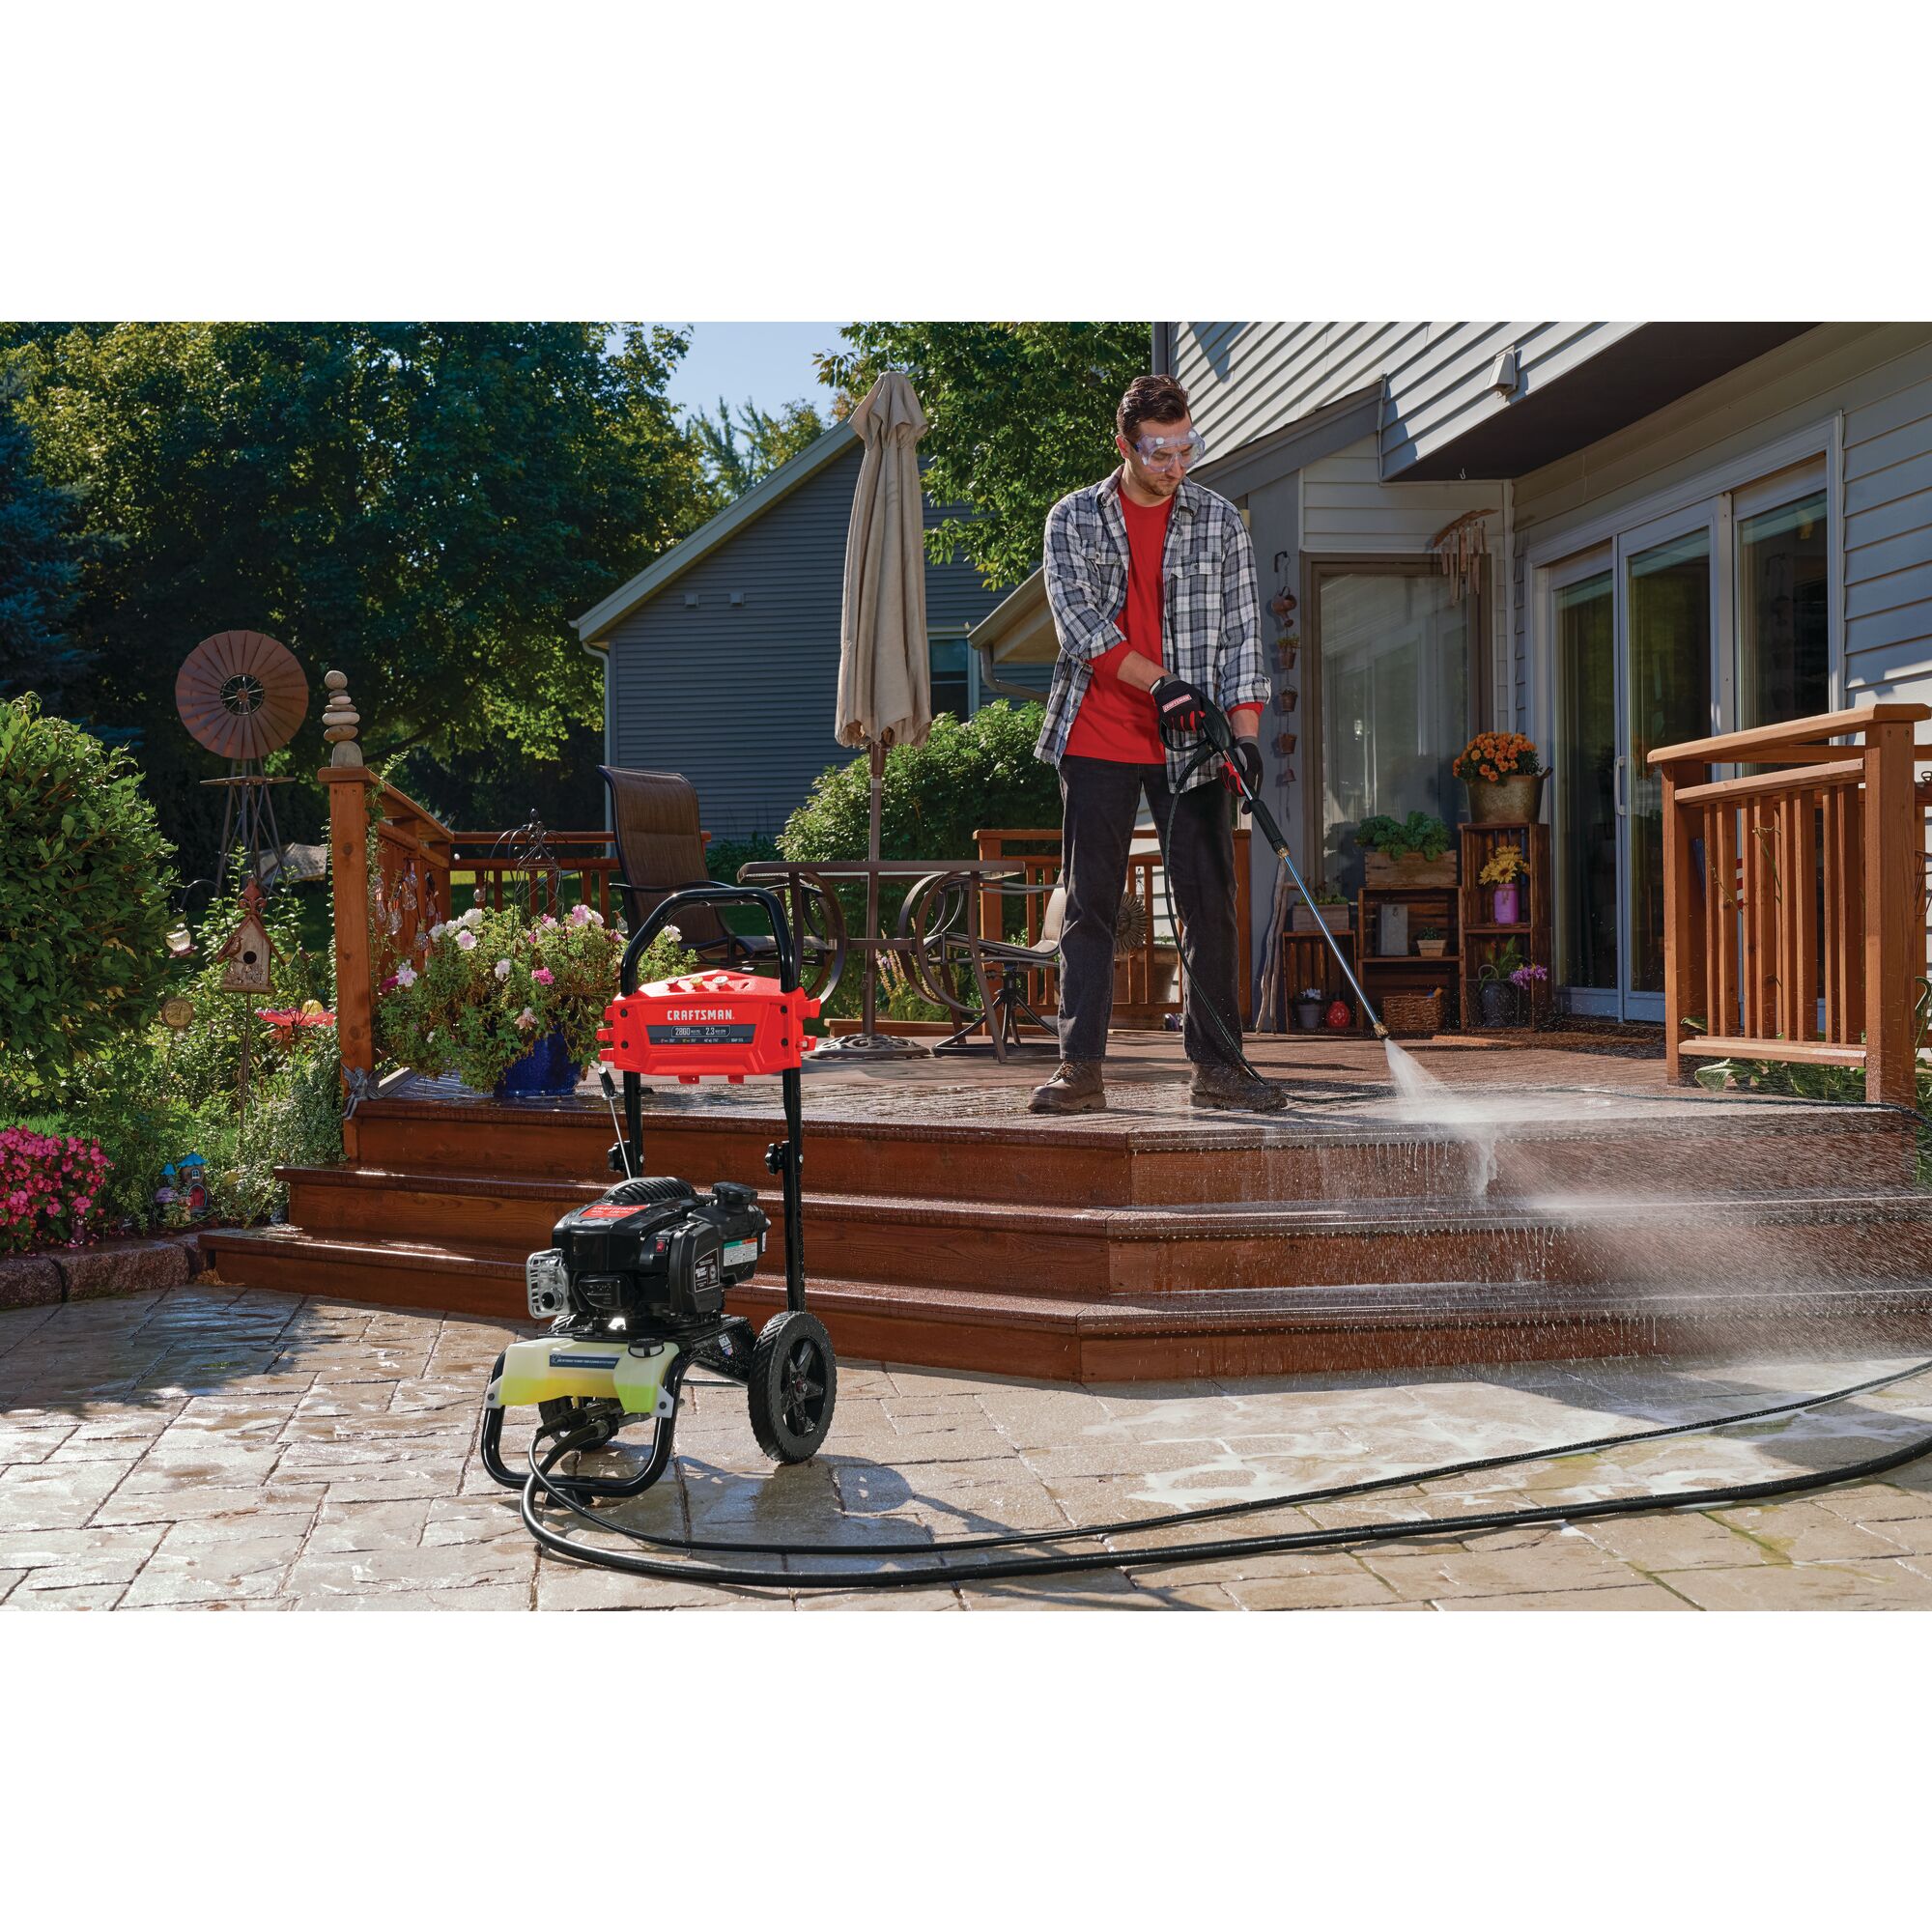 2800 Max P S I / 2.3 max G P M Pressure washer being used by a person to clean courtyard.